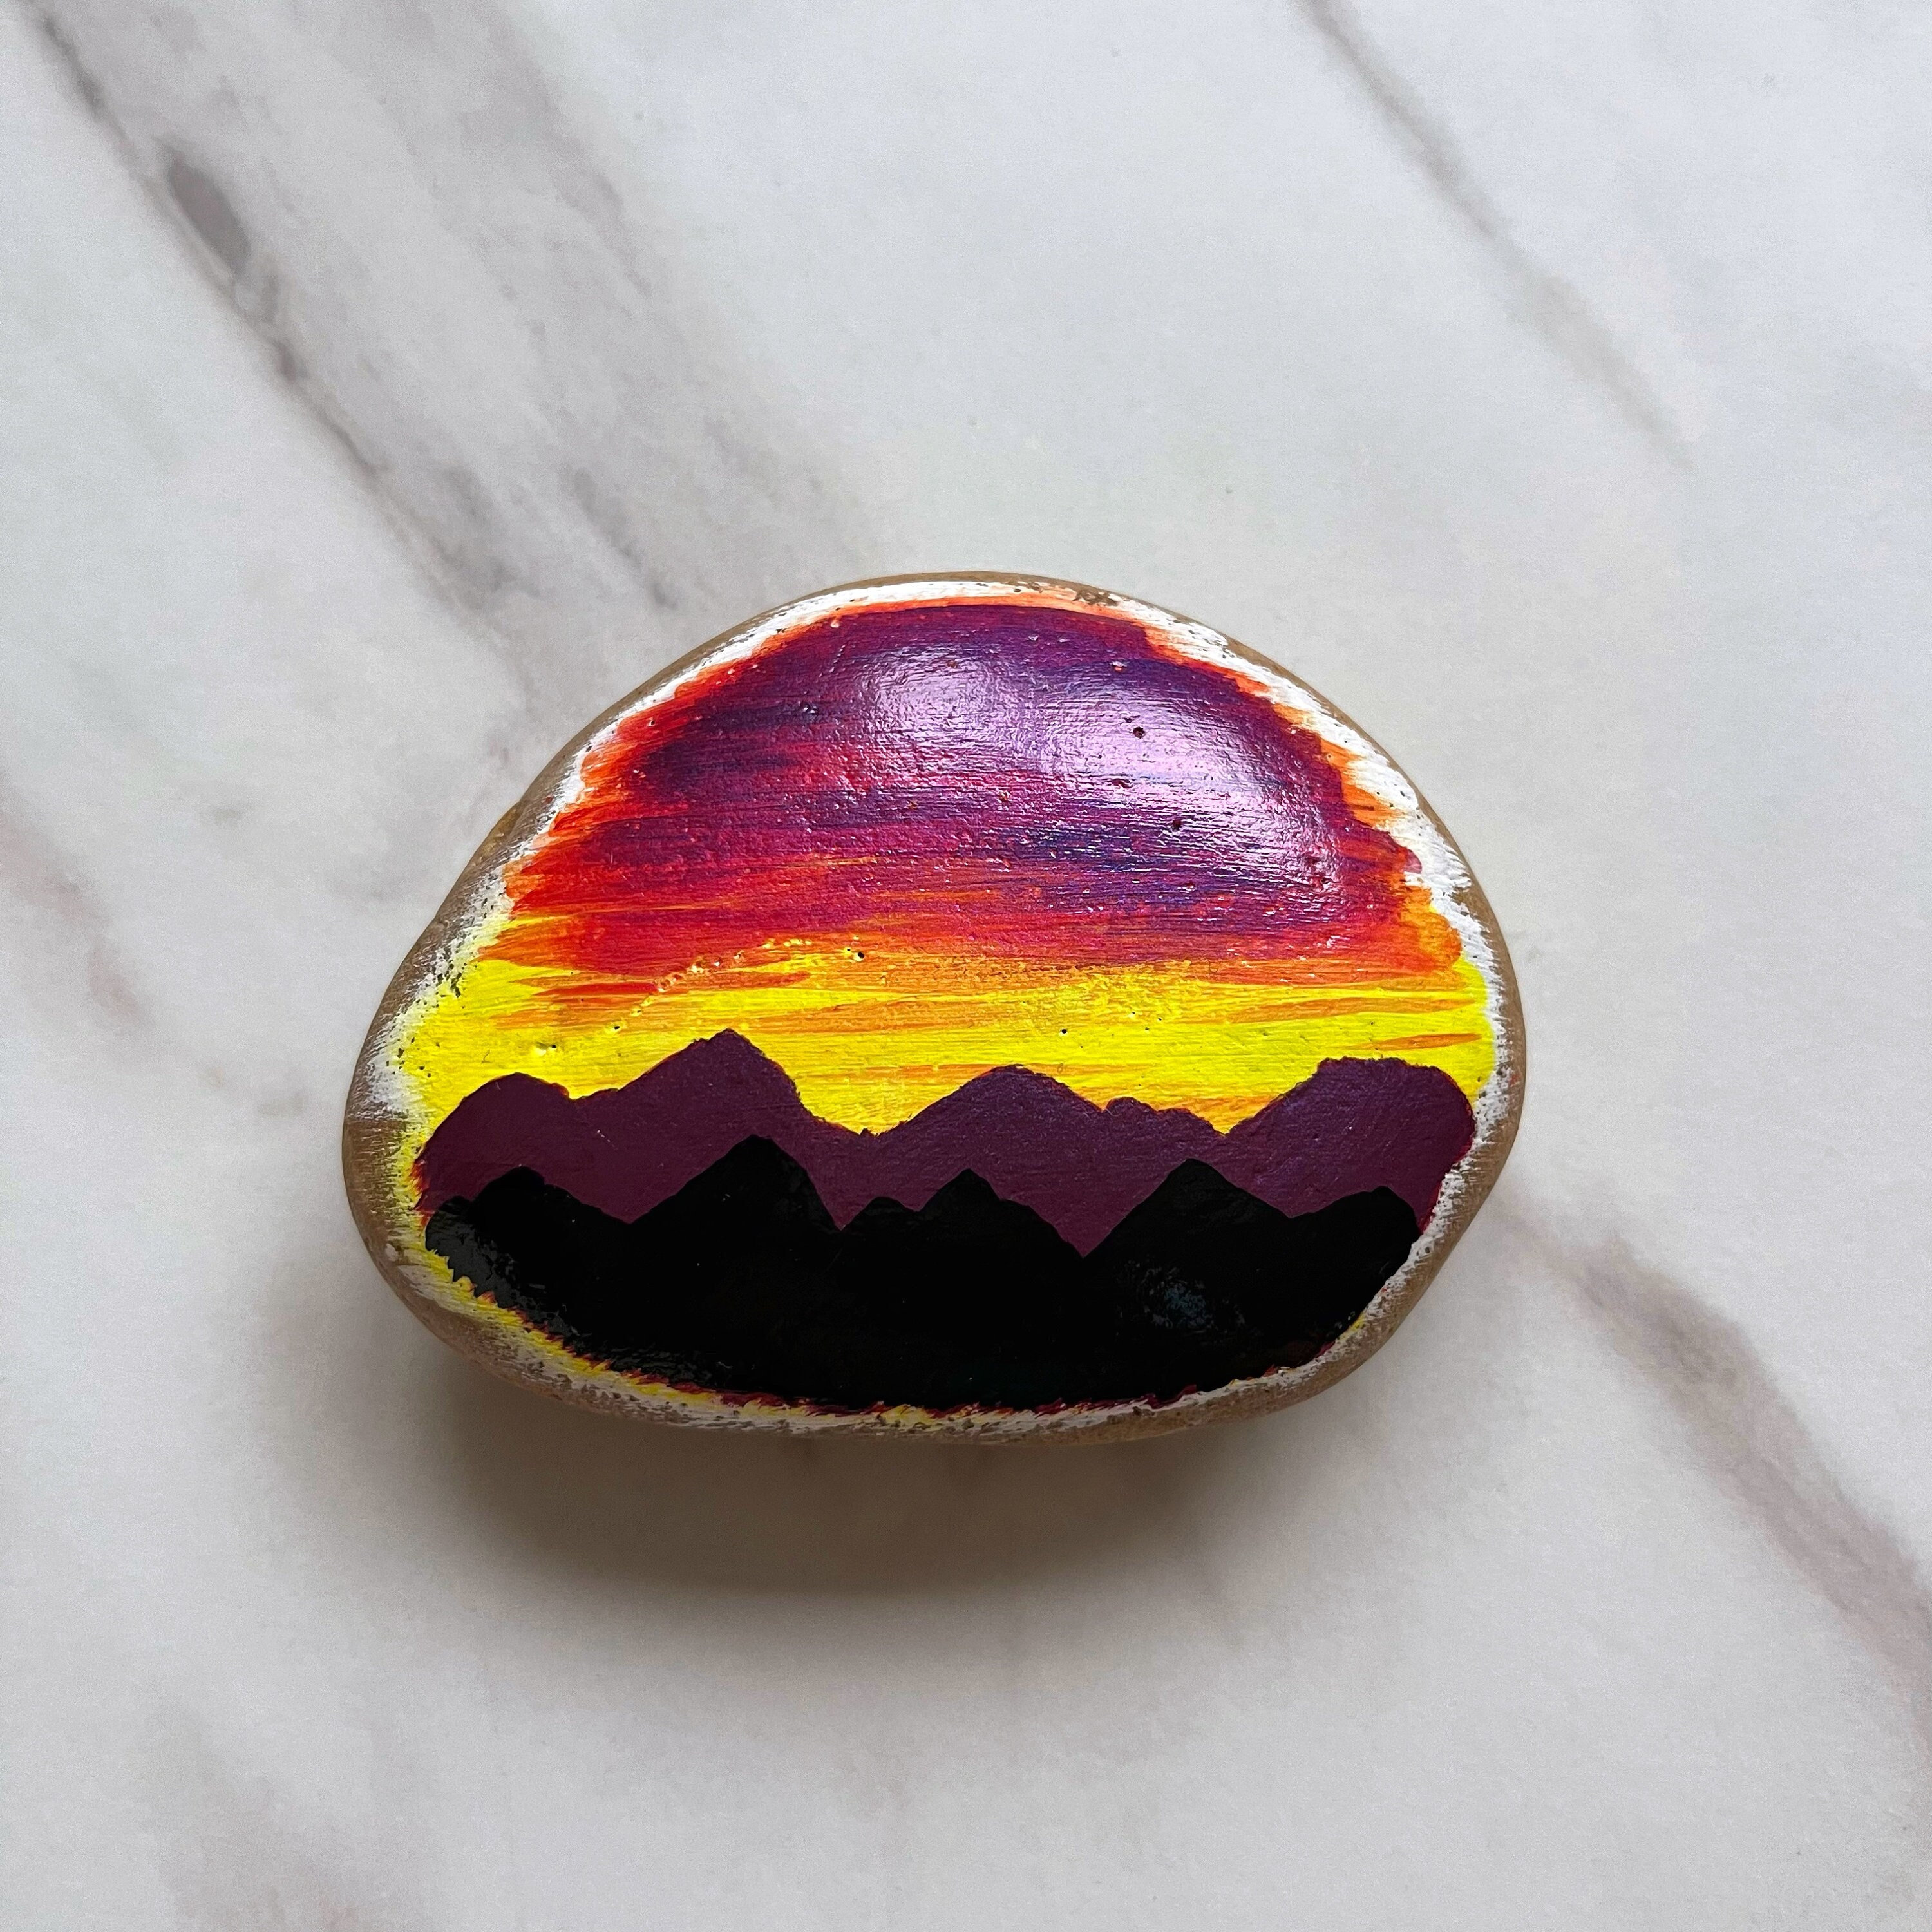 Painted Sea Stones Rocks, Painting Sunset and Sunrise Stones, Art Color Sea  Stone, Paint Rock Sunset, Personalization Drawing Stone 